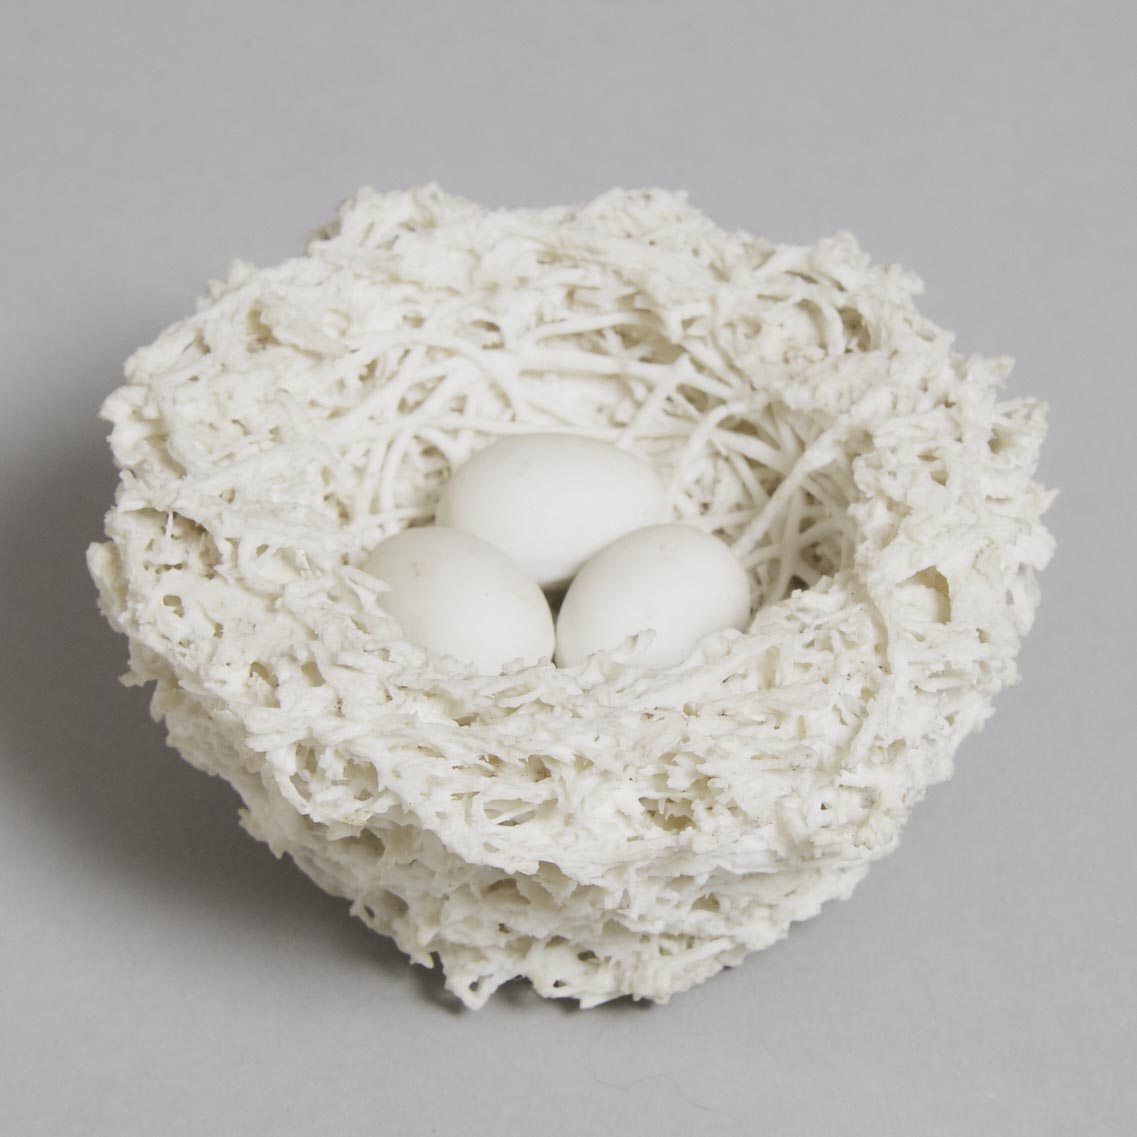 Bristol White Biscuit Porcelain Nest with Three Eggs, Edward Raby for Pountney & Co., c.1850